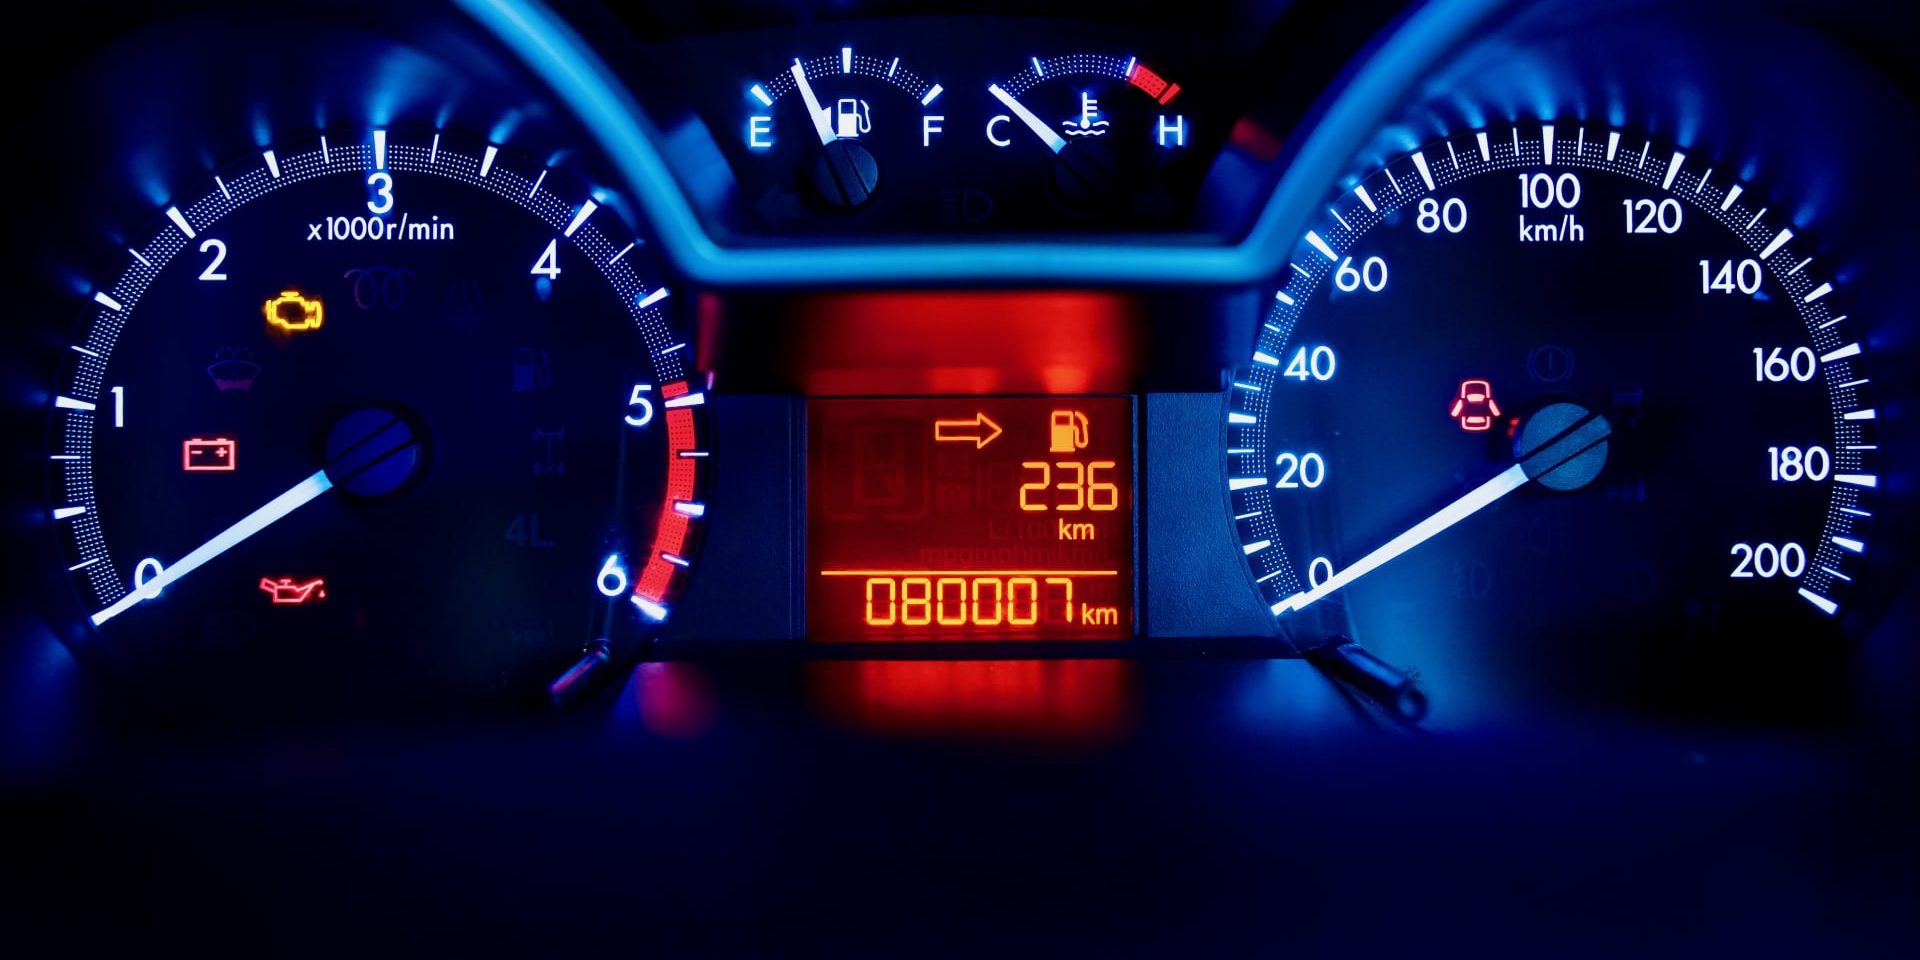 South Australian Government cracks down on dodgy car dealers, odometer tampering